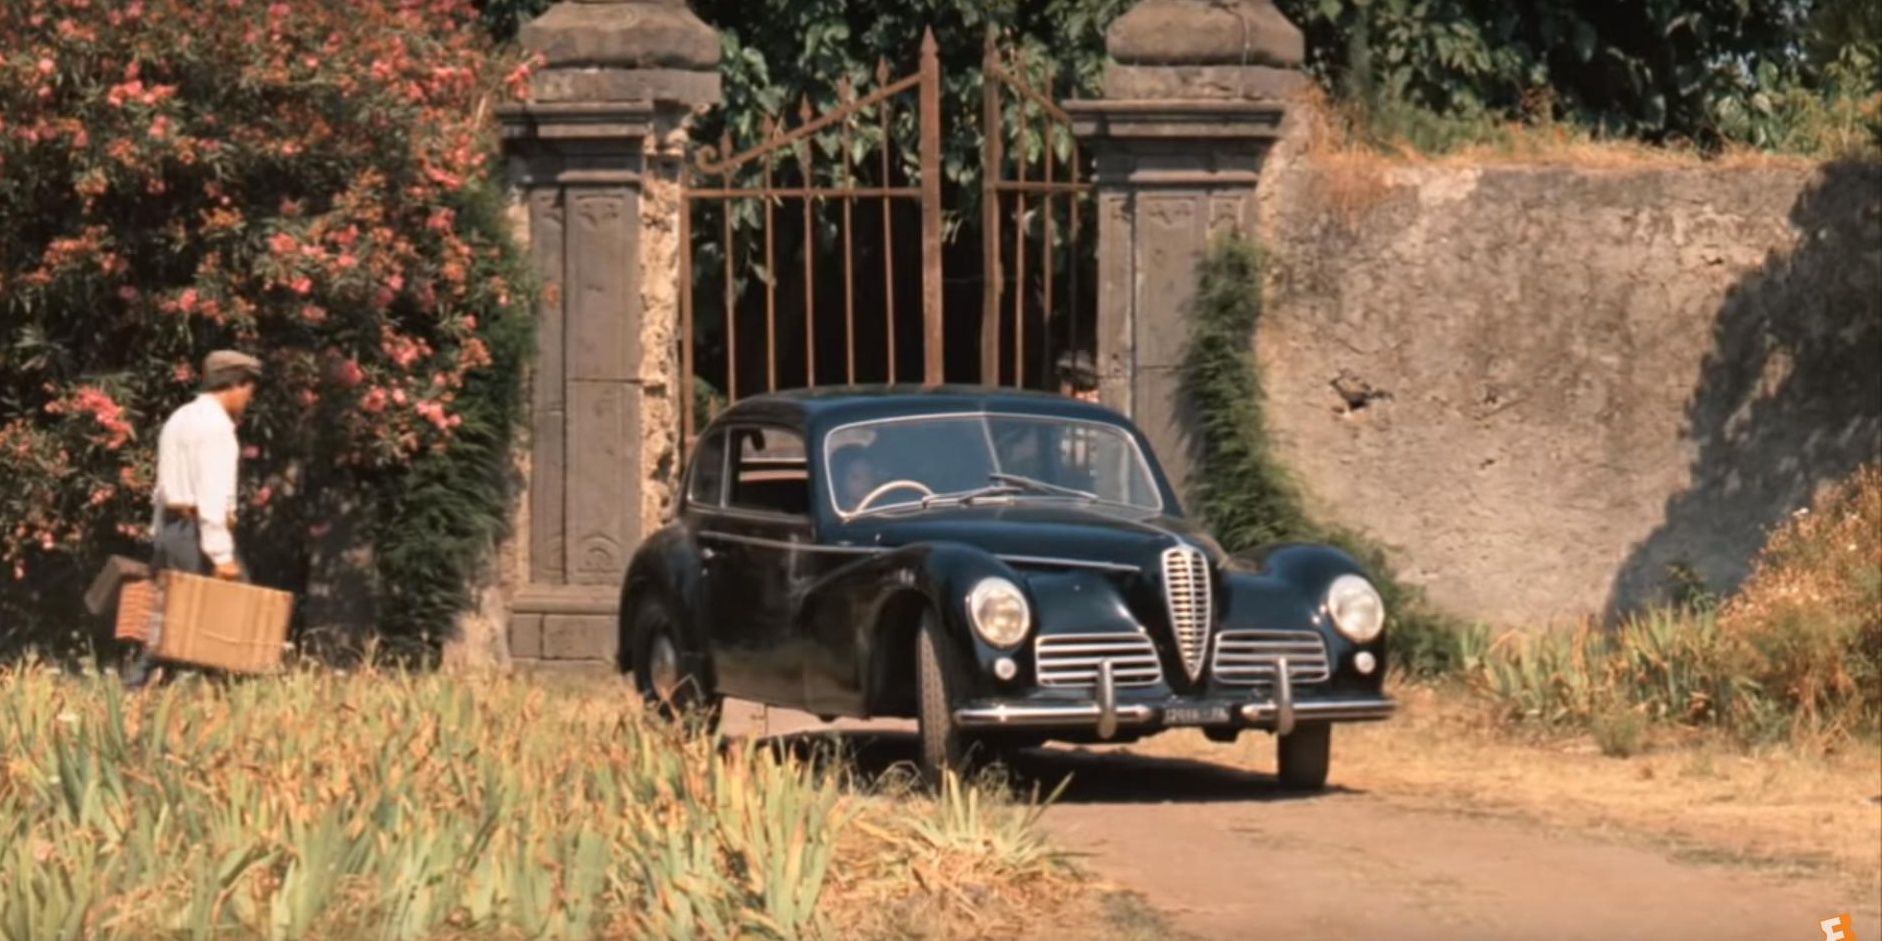 Michael's wife Apolonia test drives the Alfa Romeo 6C in The Godfather